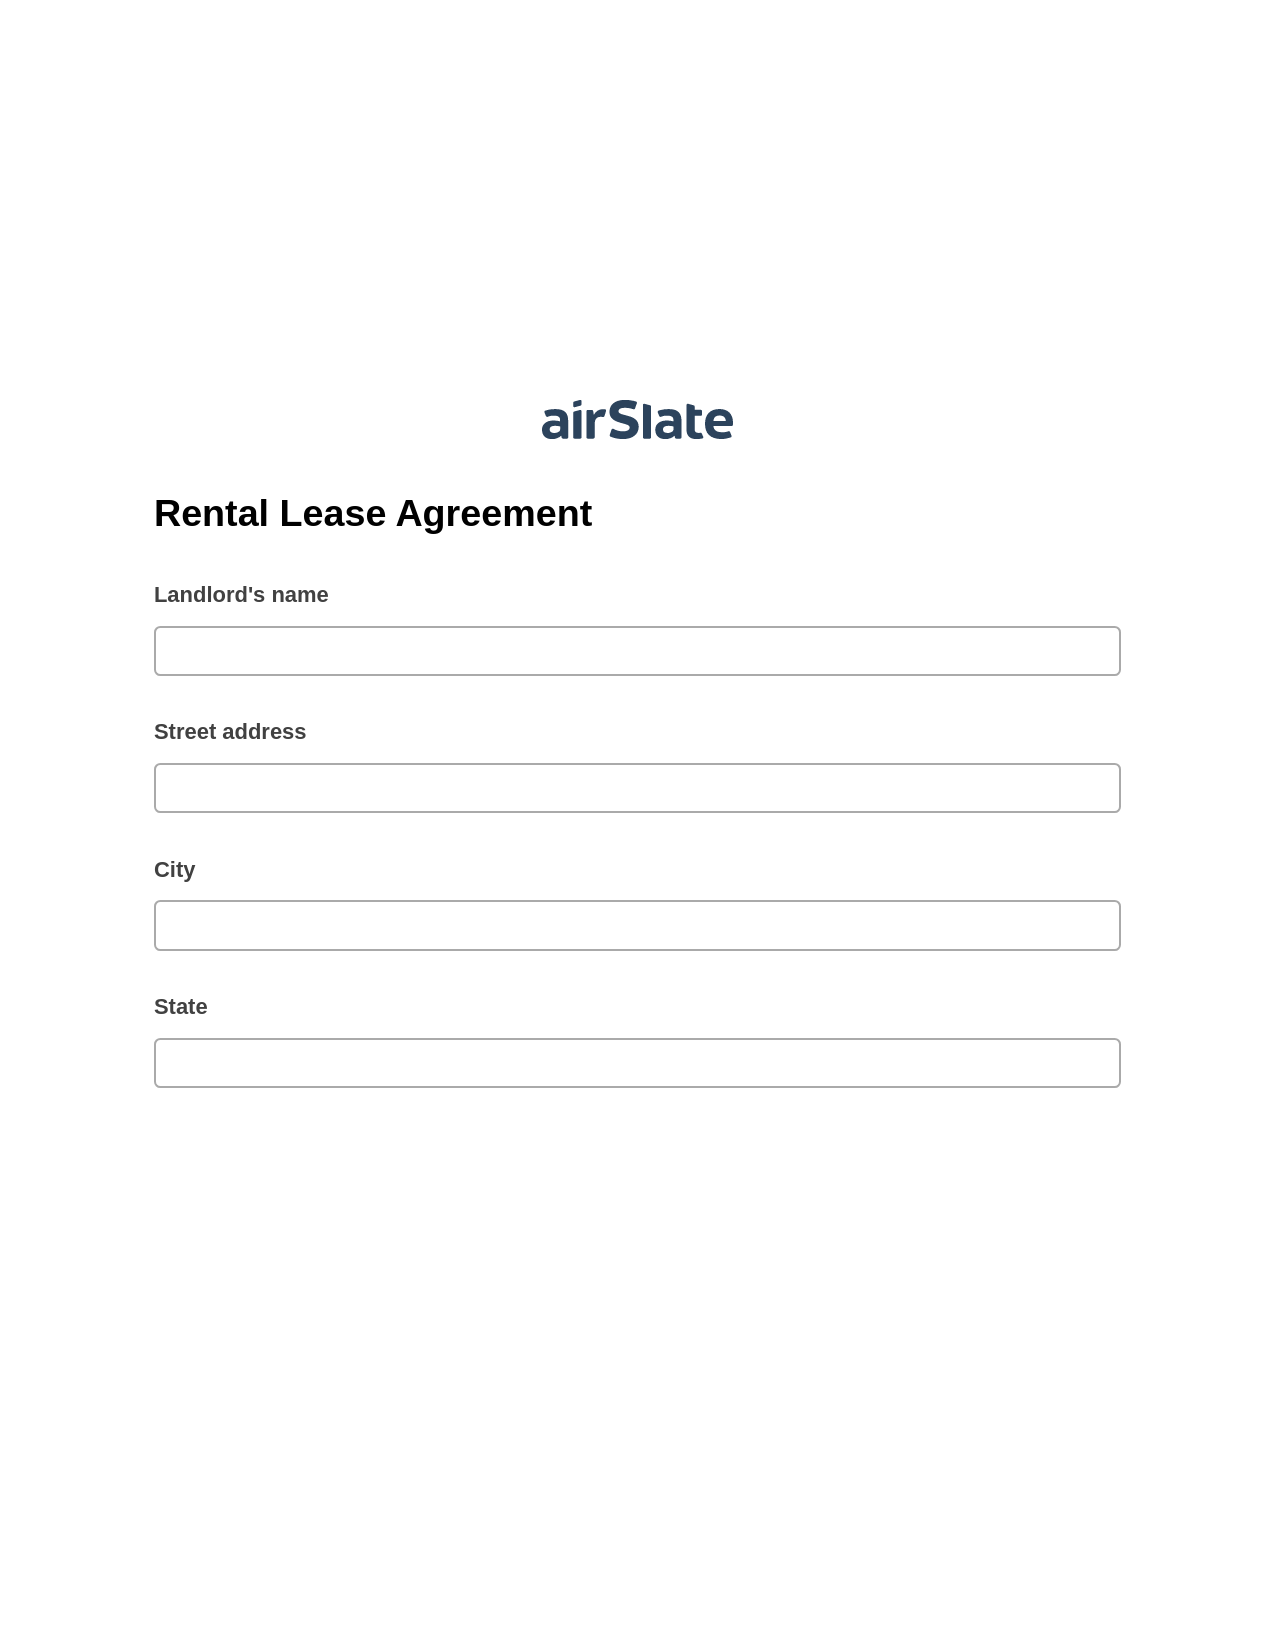 Rental Lease Agreement Pre-fill Dropdown from Airtable, Invoke Salesforce Process Bot, Slack Two-Way Binding Bot